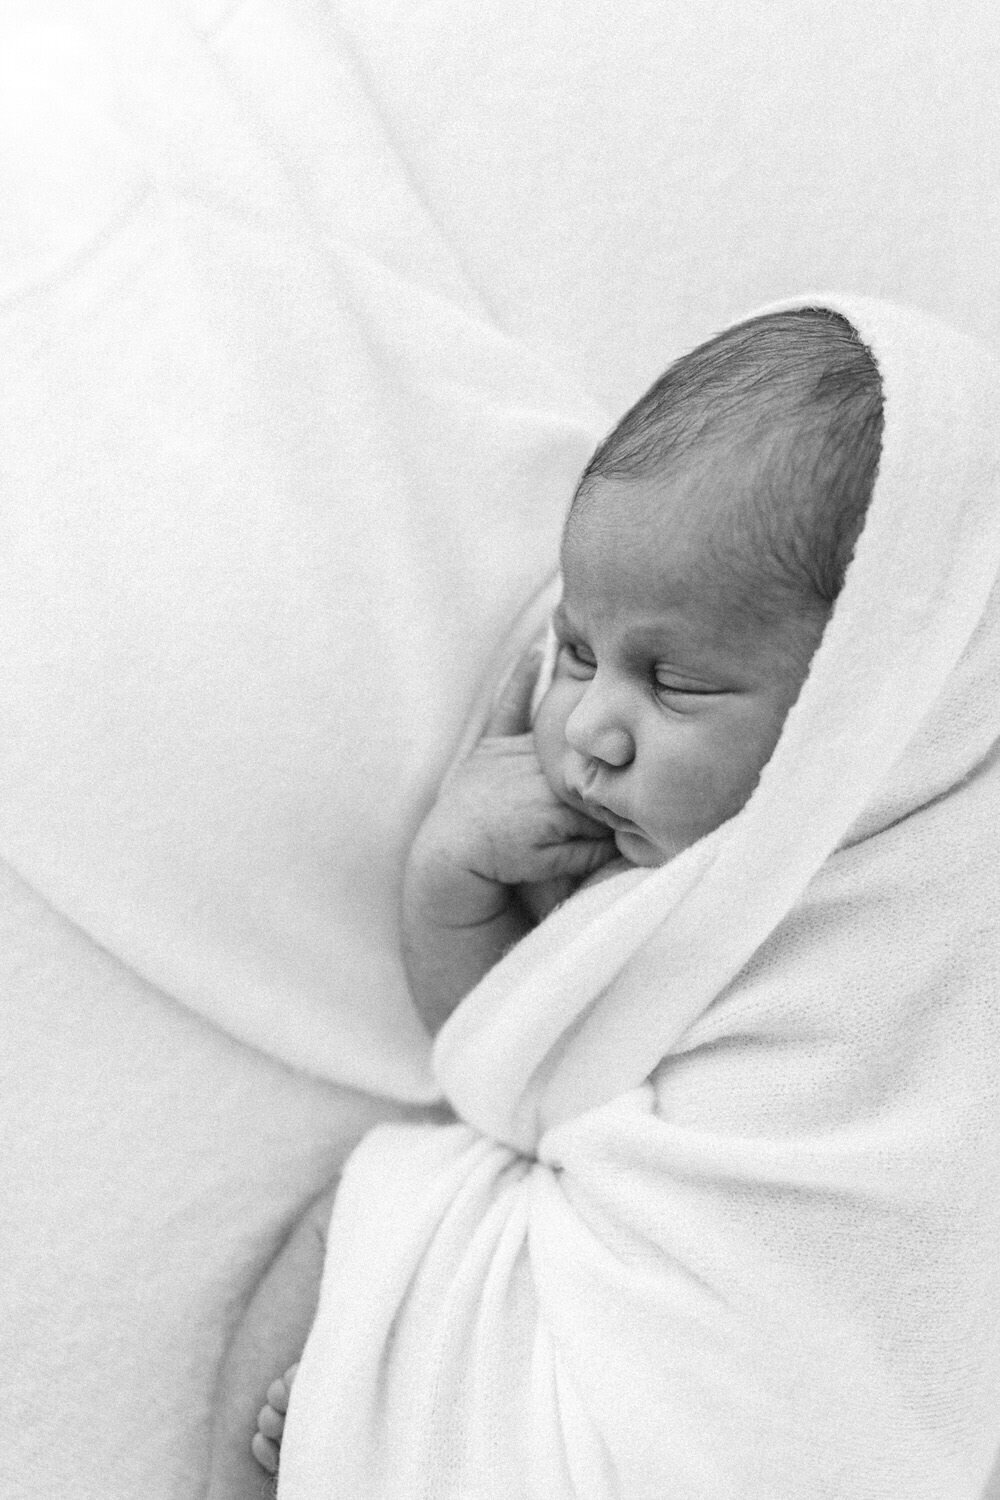 newborn baby tucked up in a white blanket